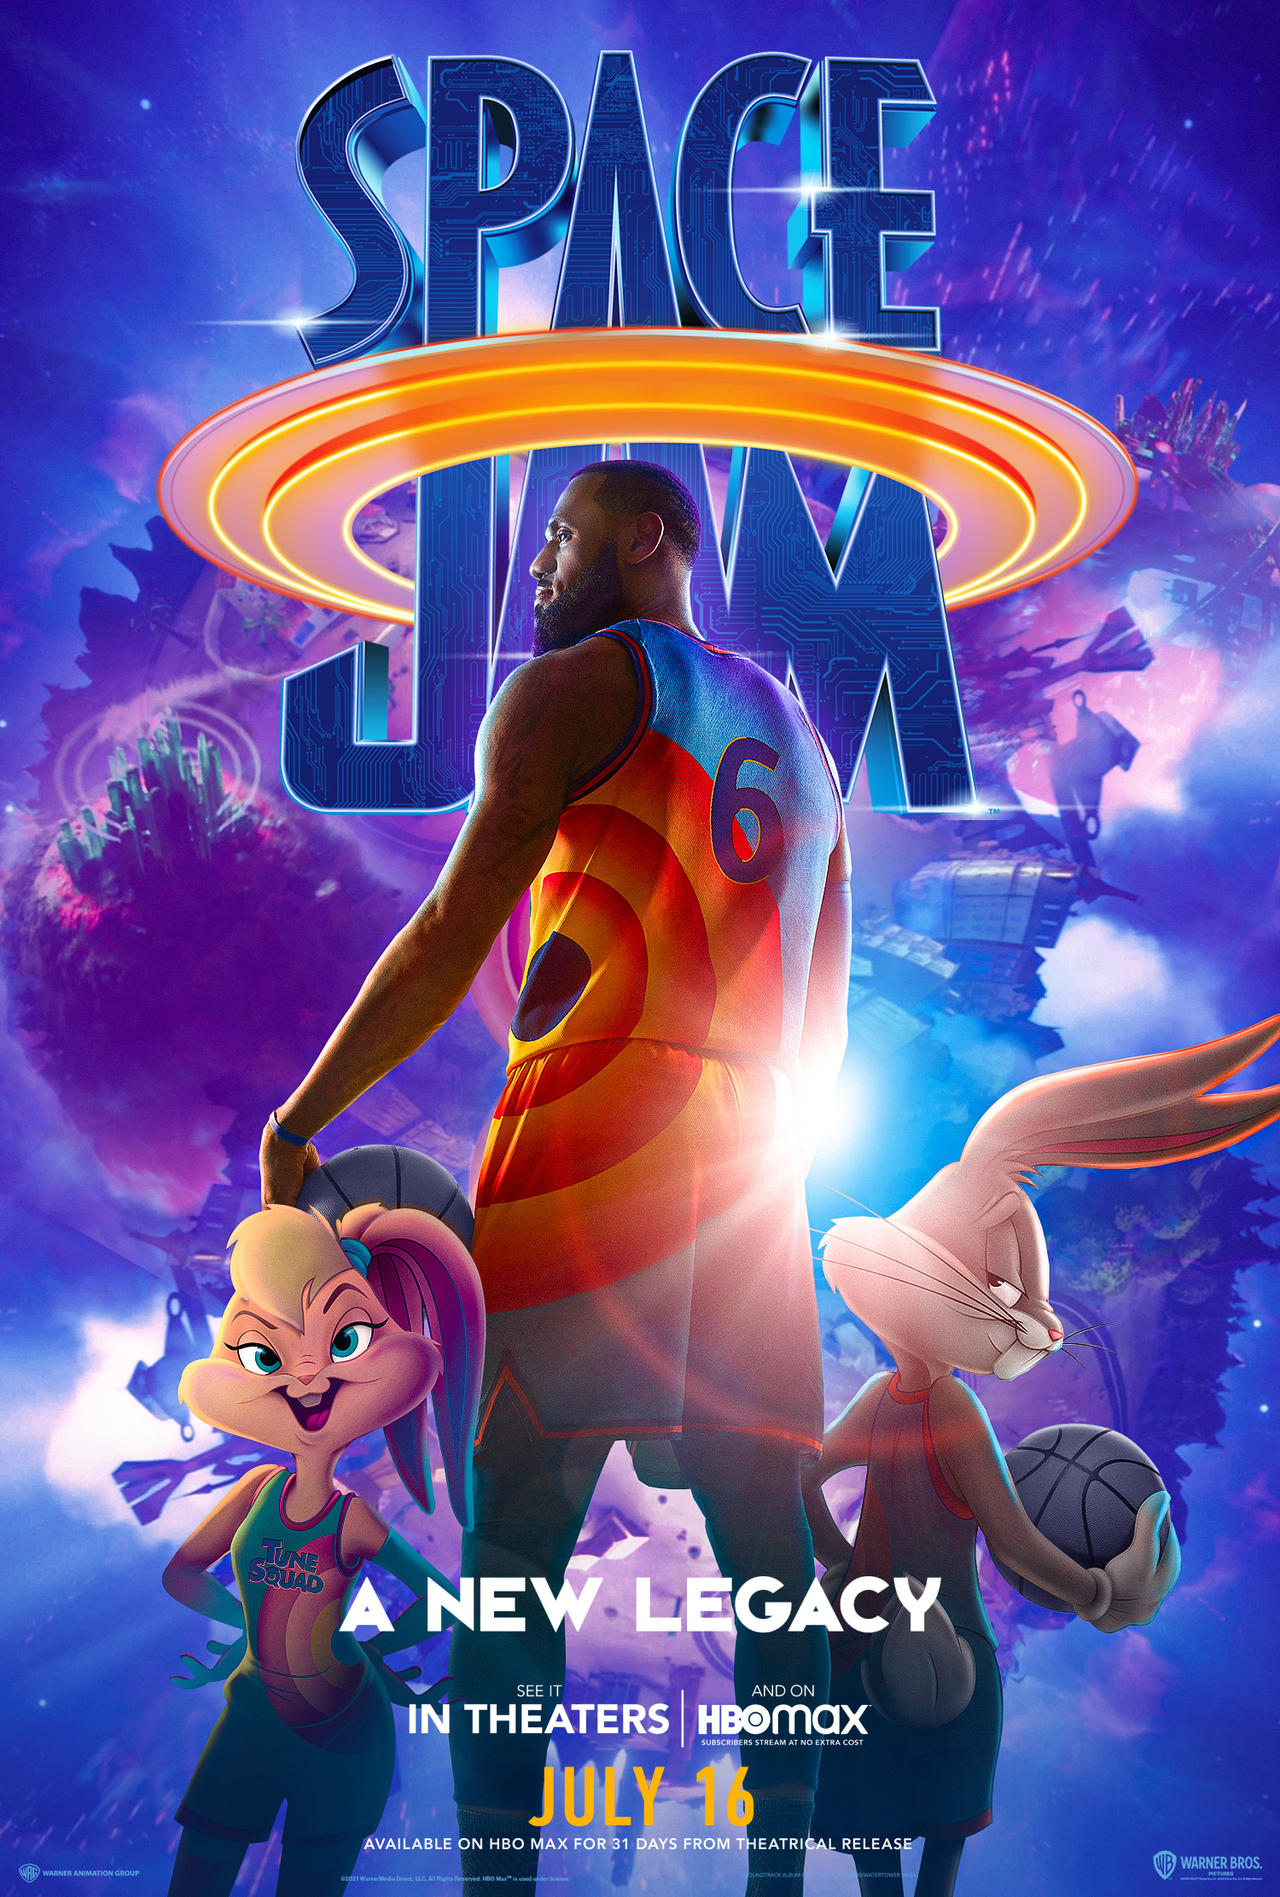 13 Space Jam: A New Legacy Poster by bakikayaa on DeviantArt